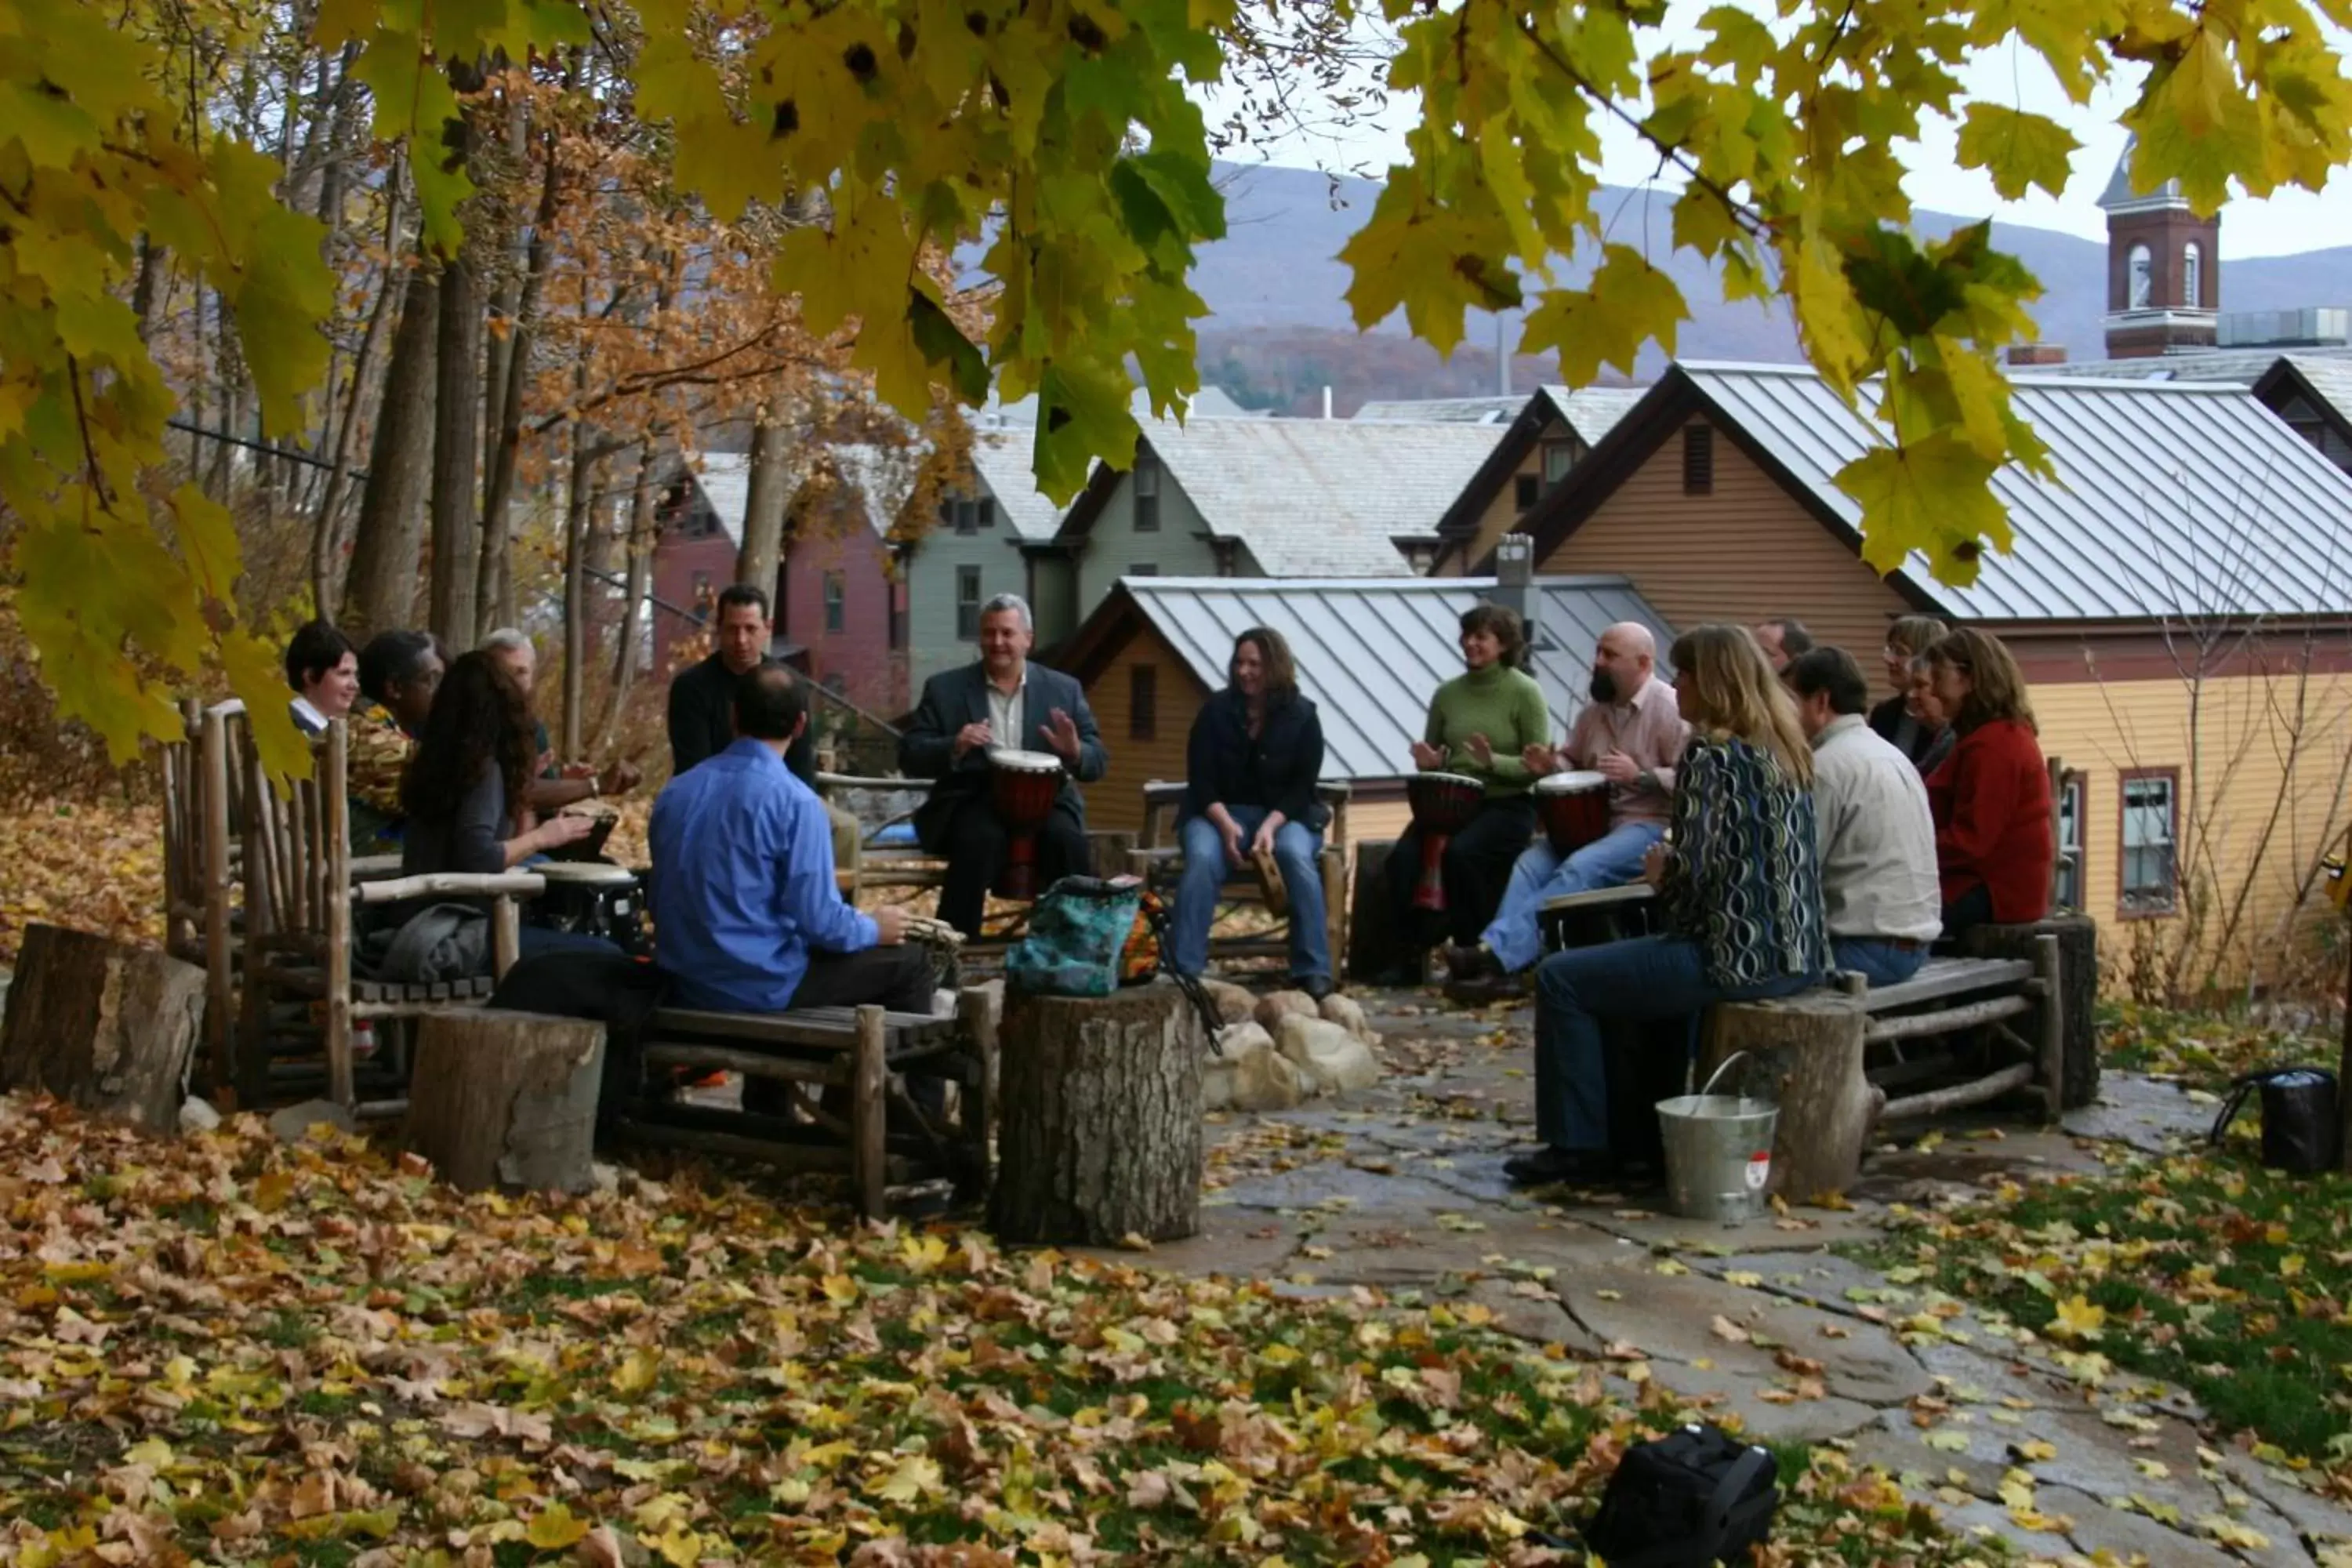 group of guests in The Porches Inn at Mass MoCA